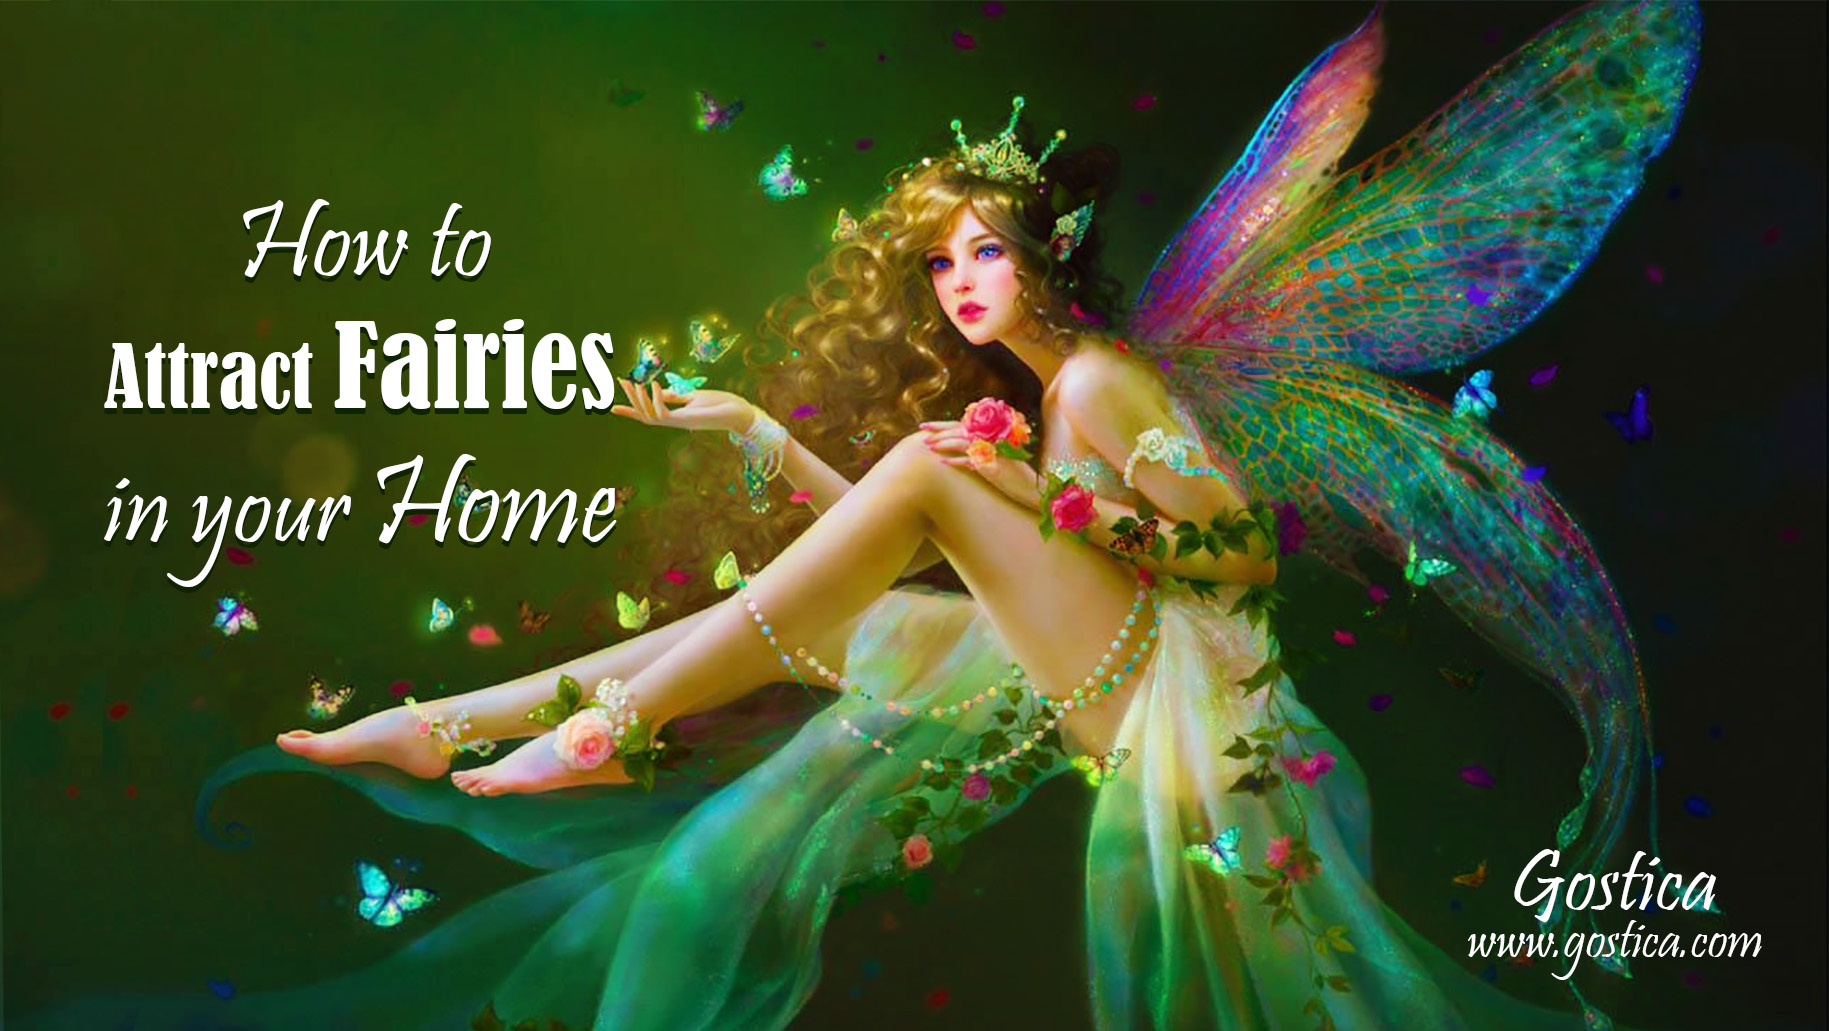 How-to-Attract-Fairies-in-your-Home.jpg